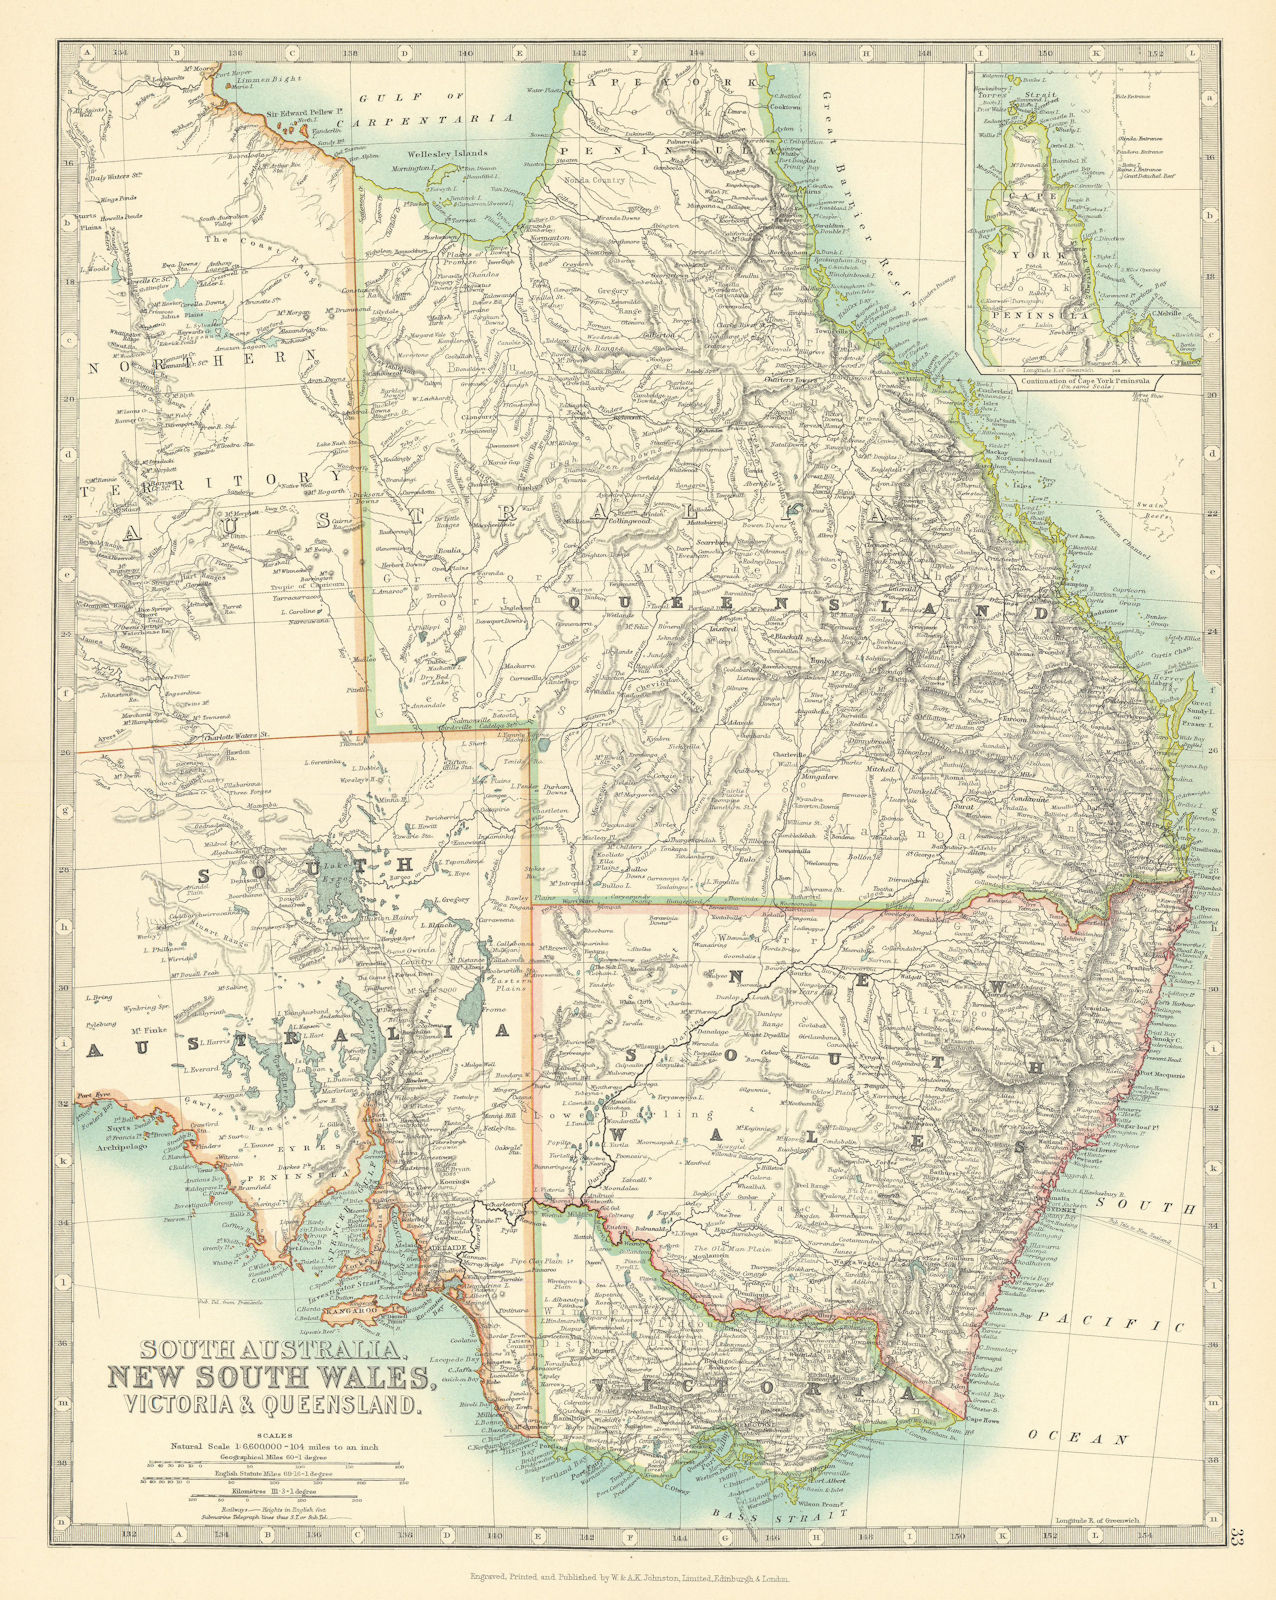 EASTERN AUSTRALIA. Queensland, New South Wales & Victoria. JOHNSTON 1911 map